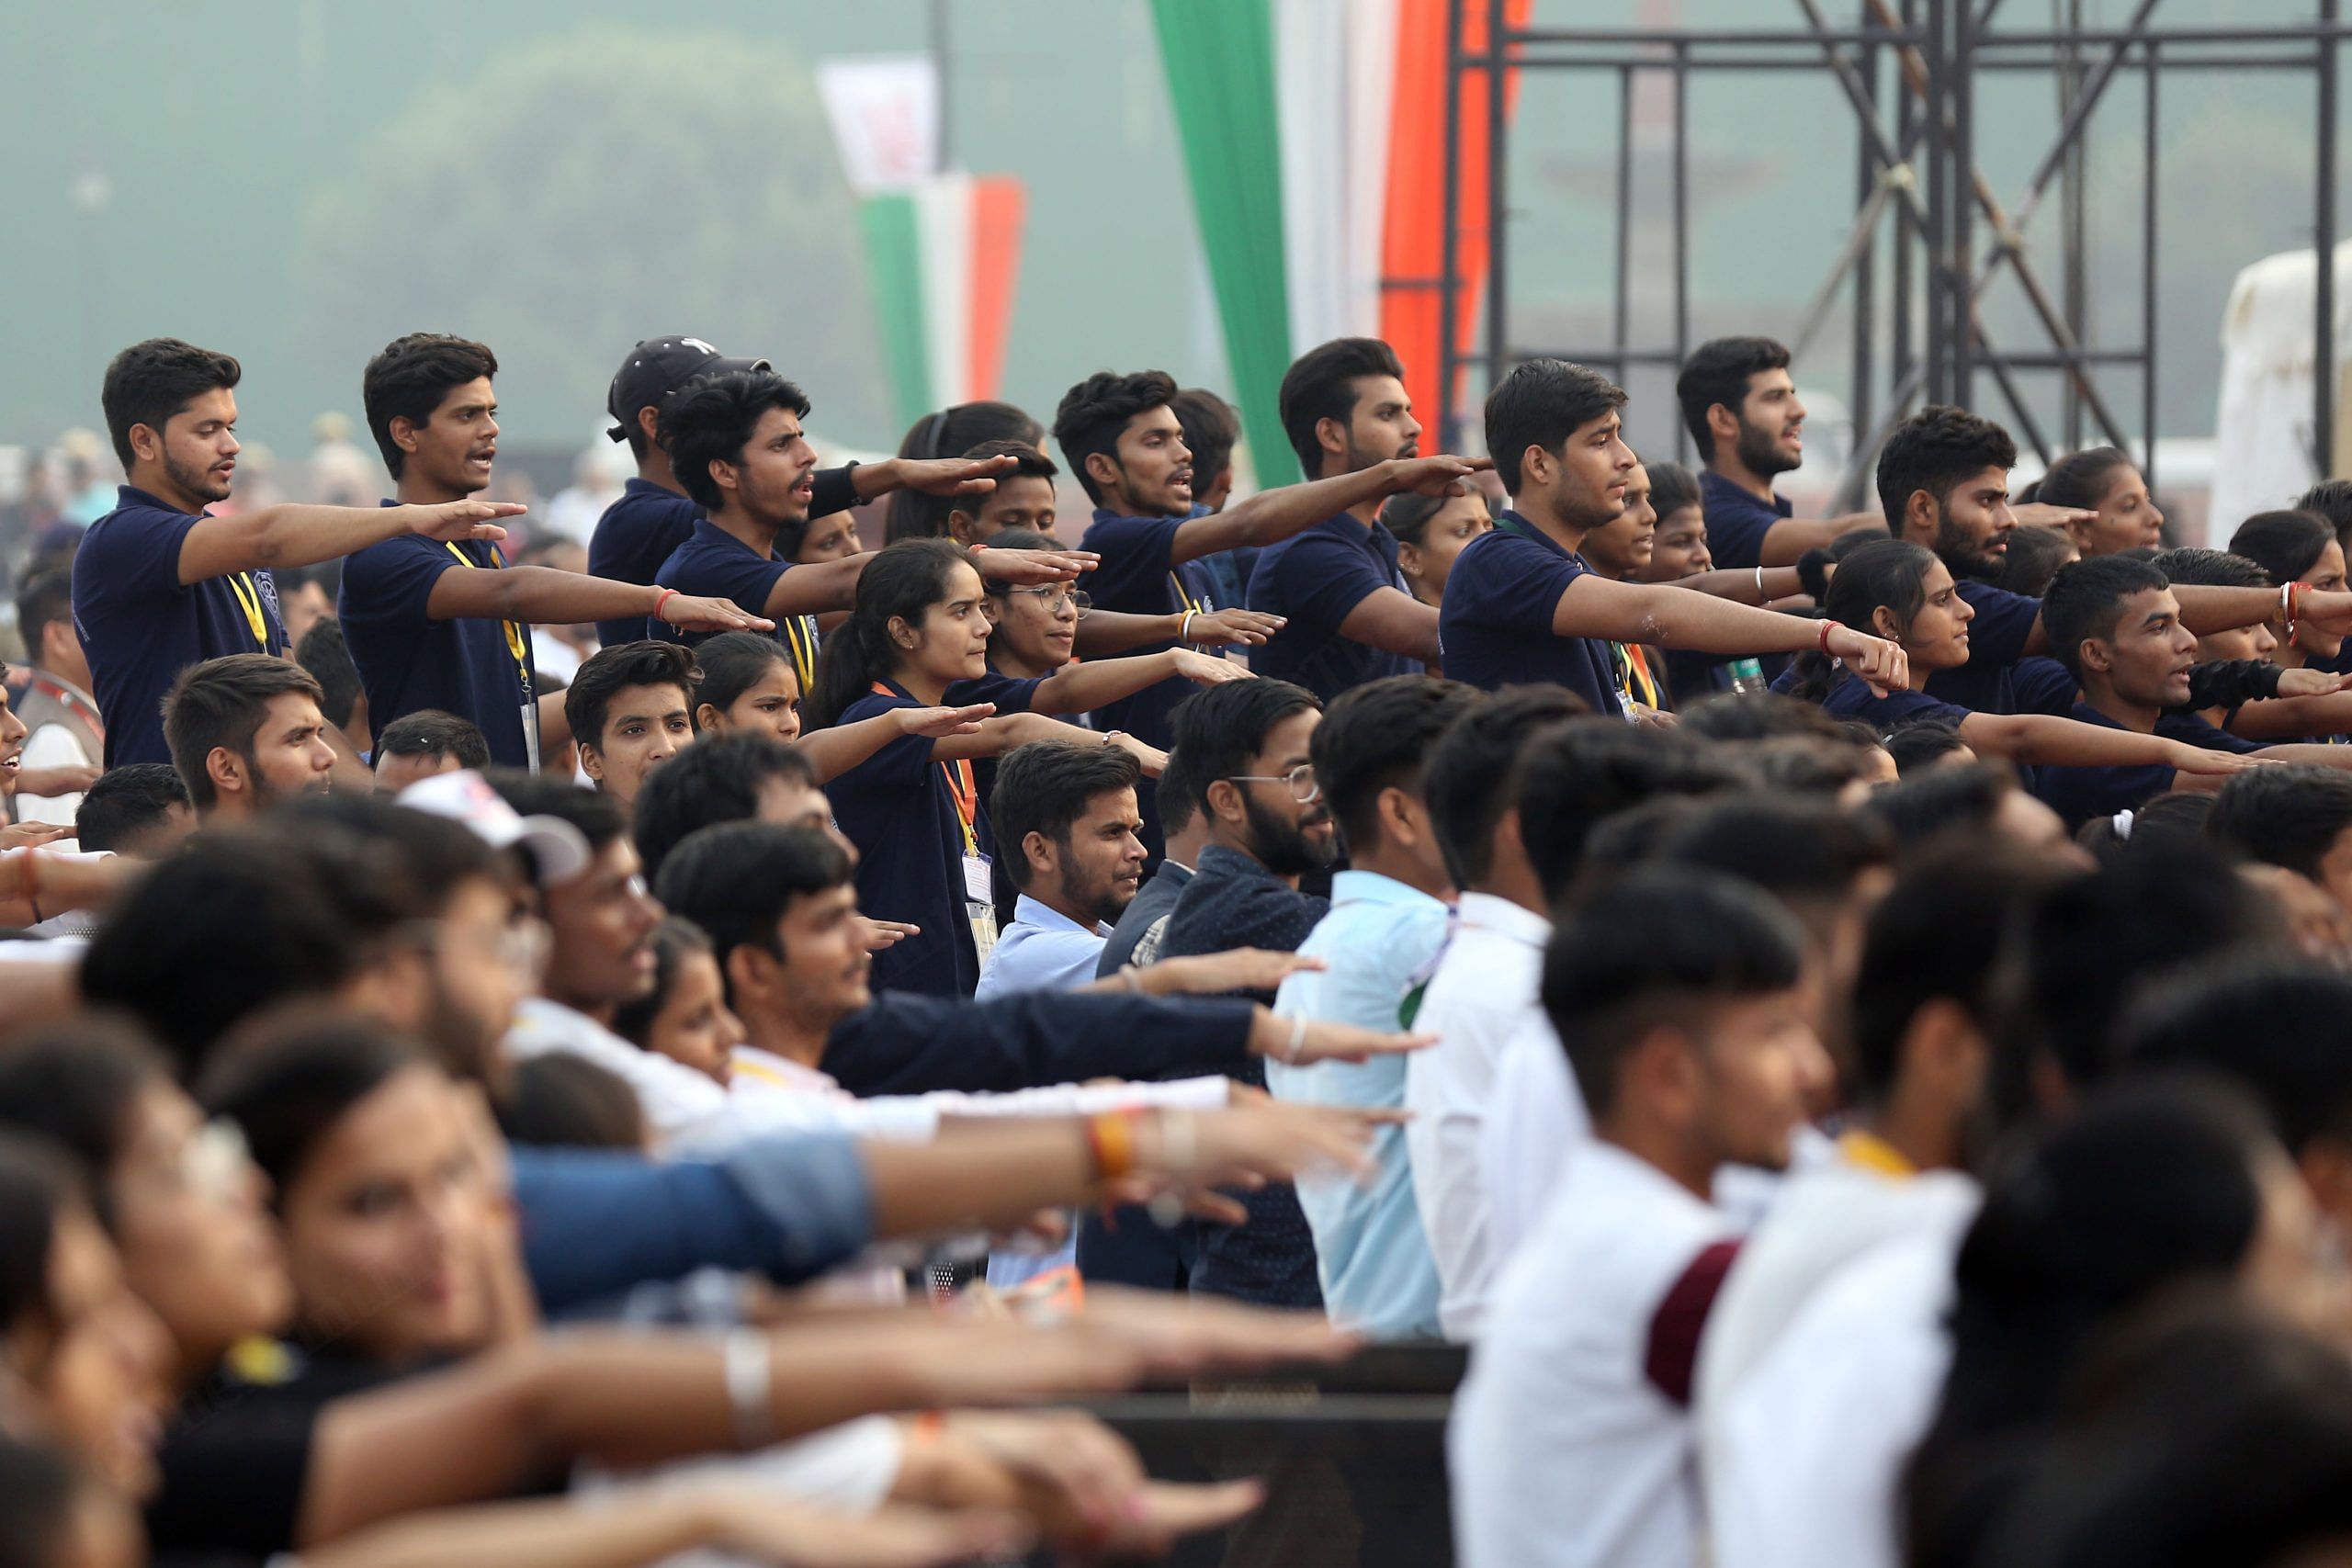 Attendees take oath during the event | Photo: Suraj Singh Bisht | ThePrint